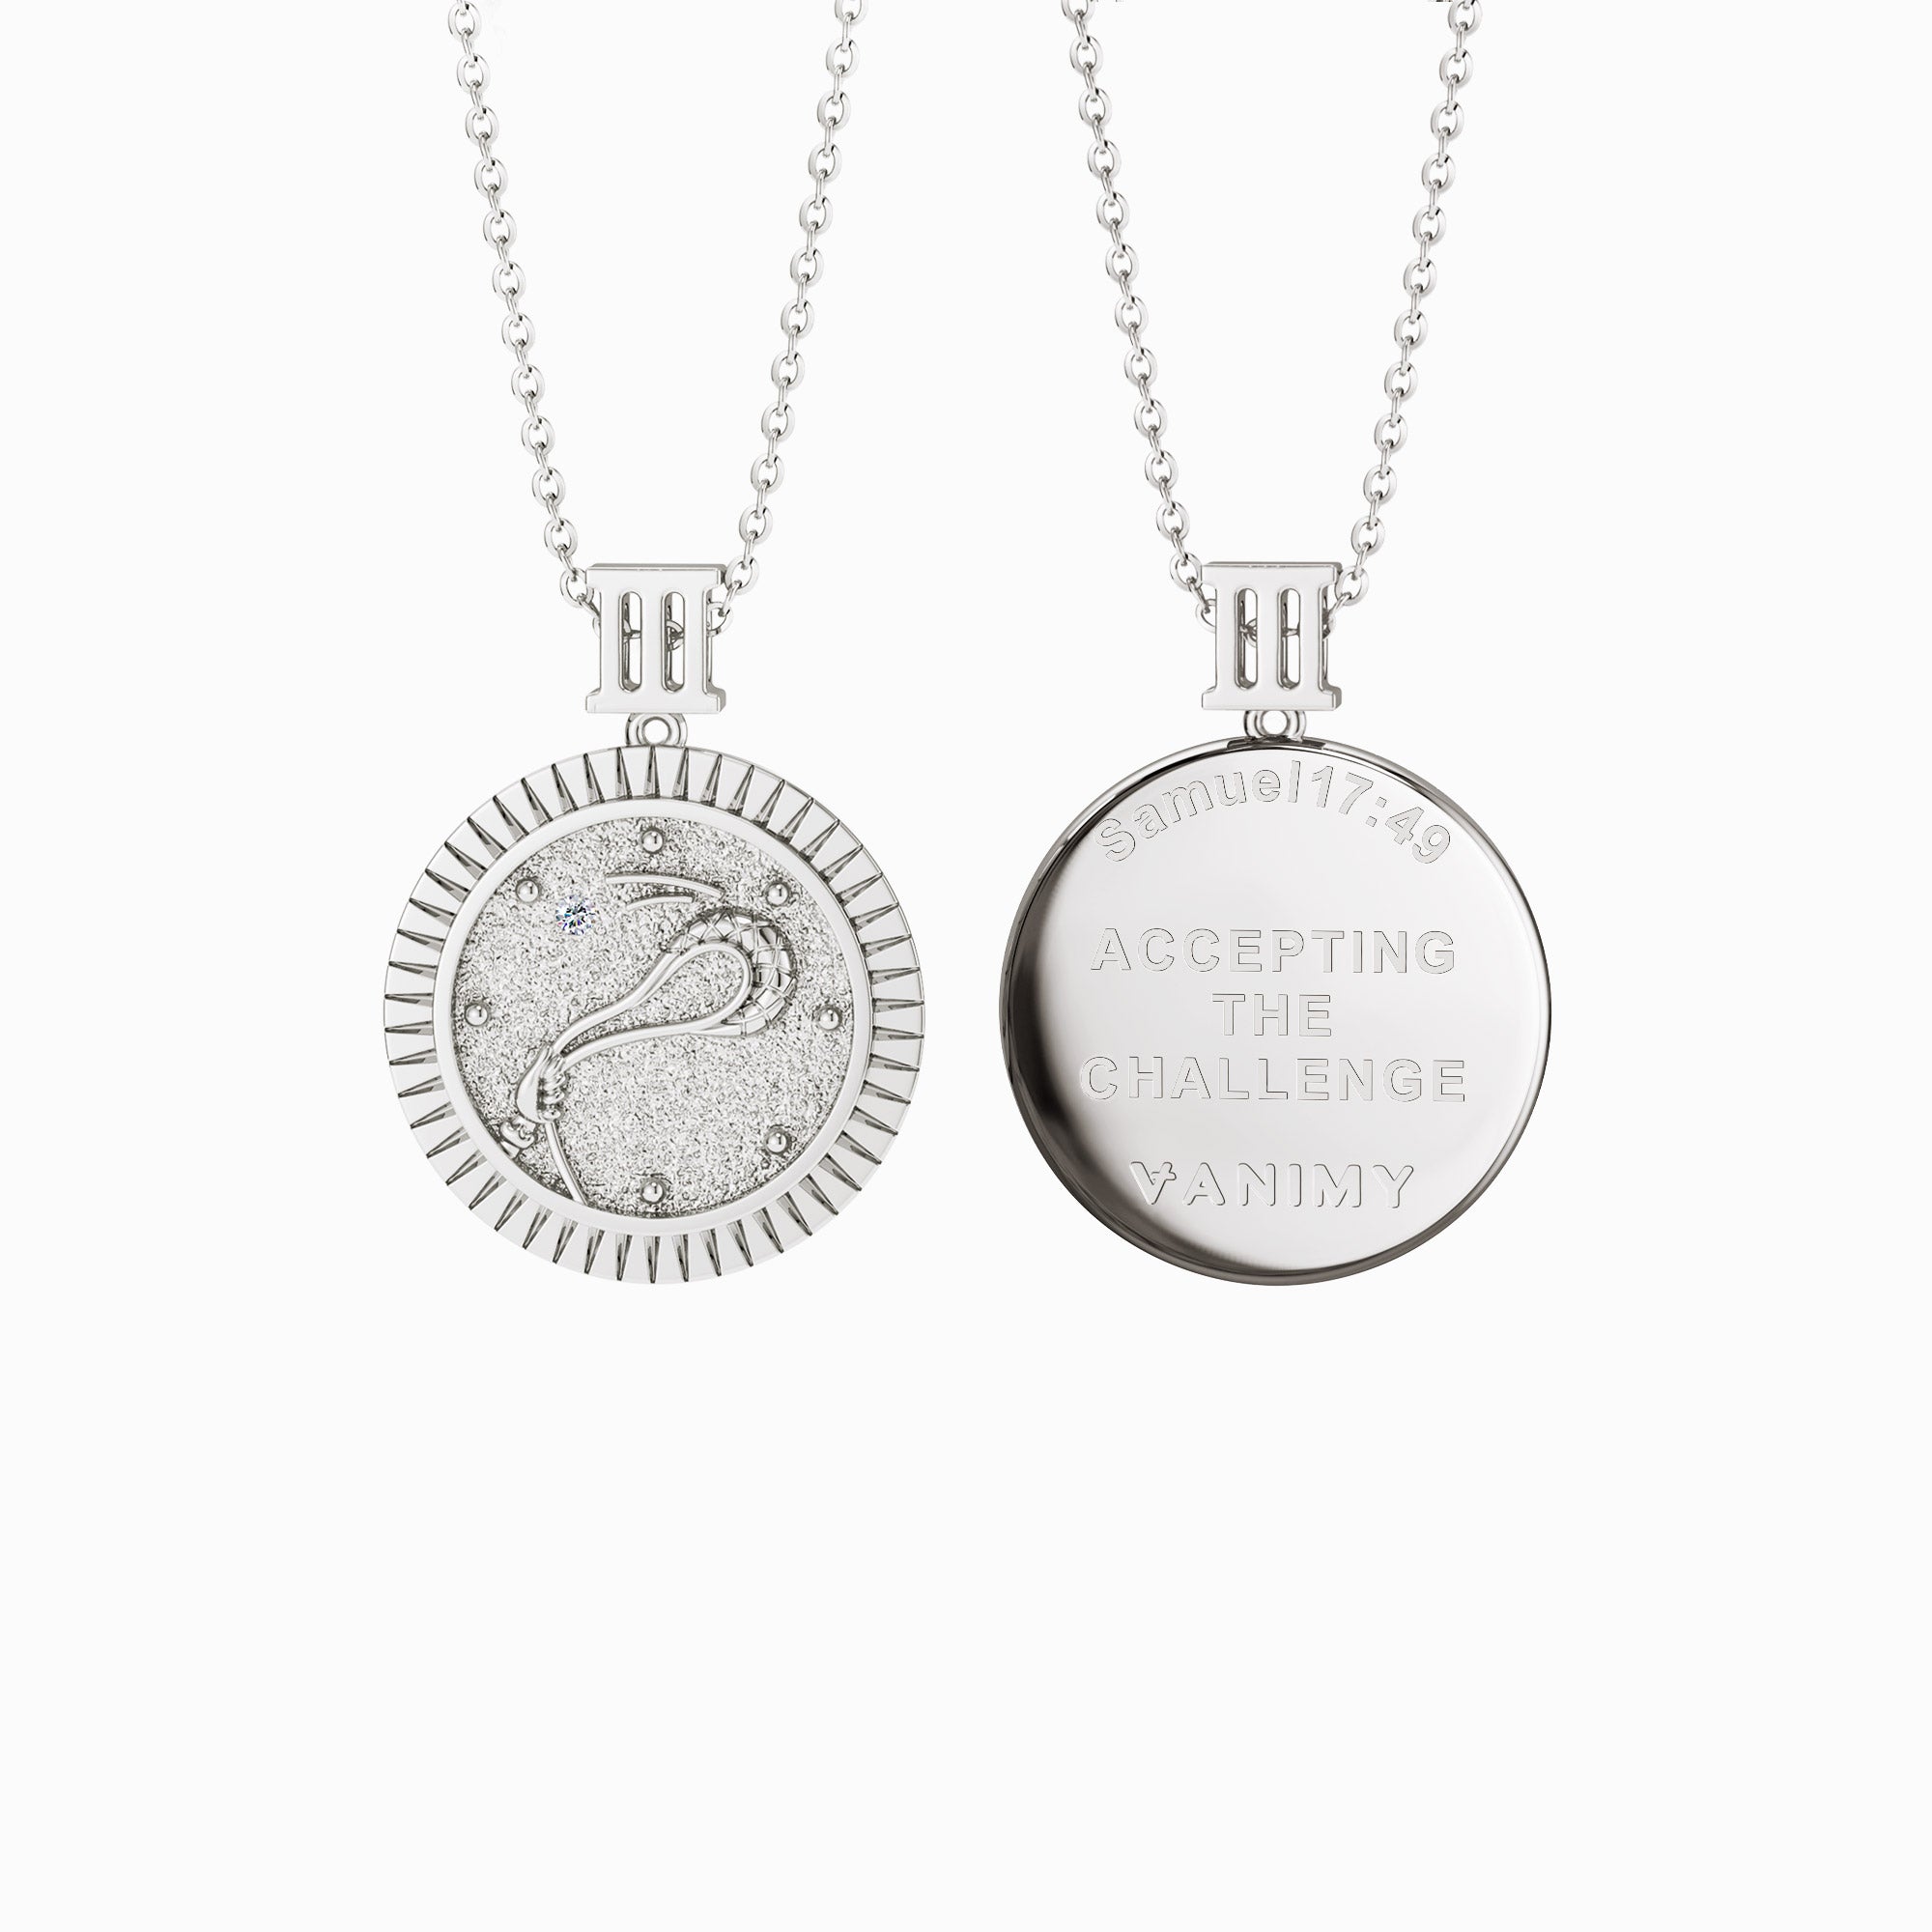 Promised Land Strength &amp; Bravery Coin Medallion Necklace - vanimy